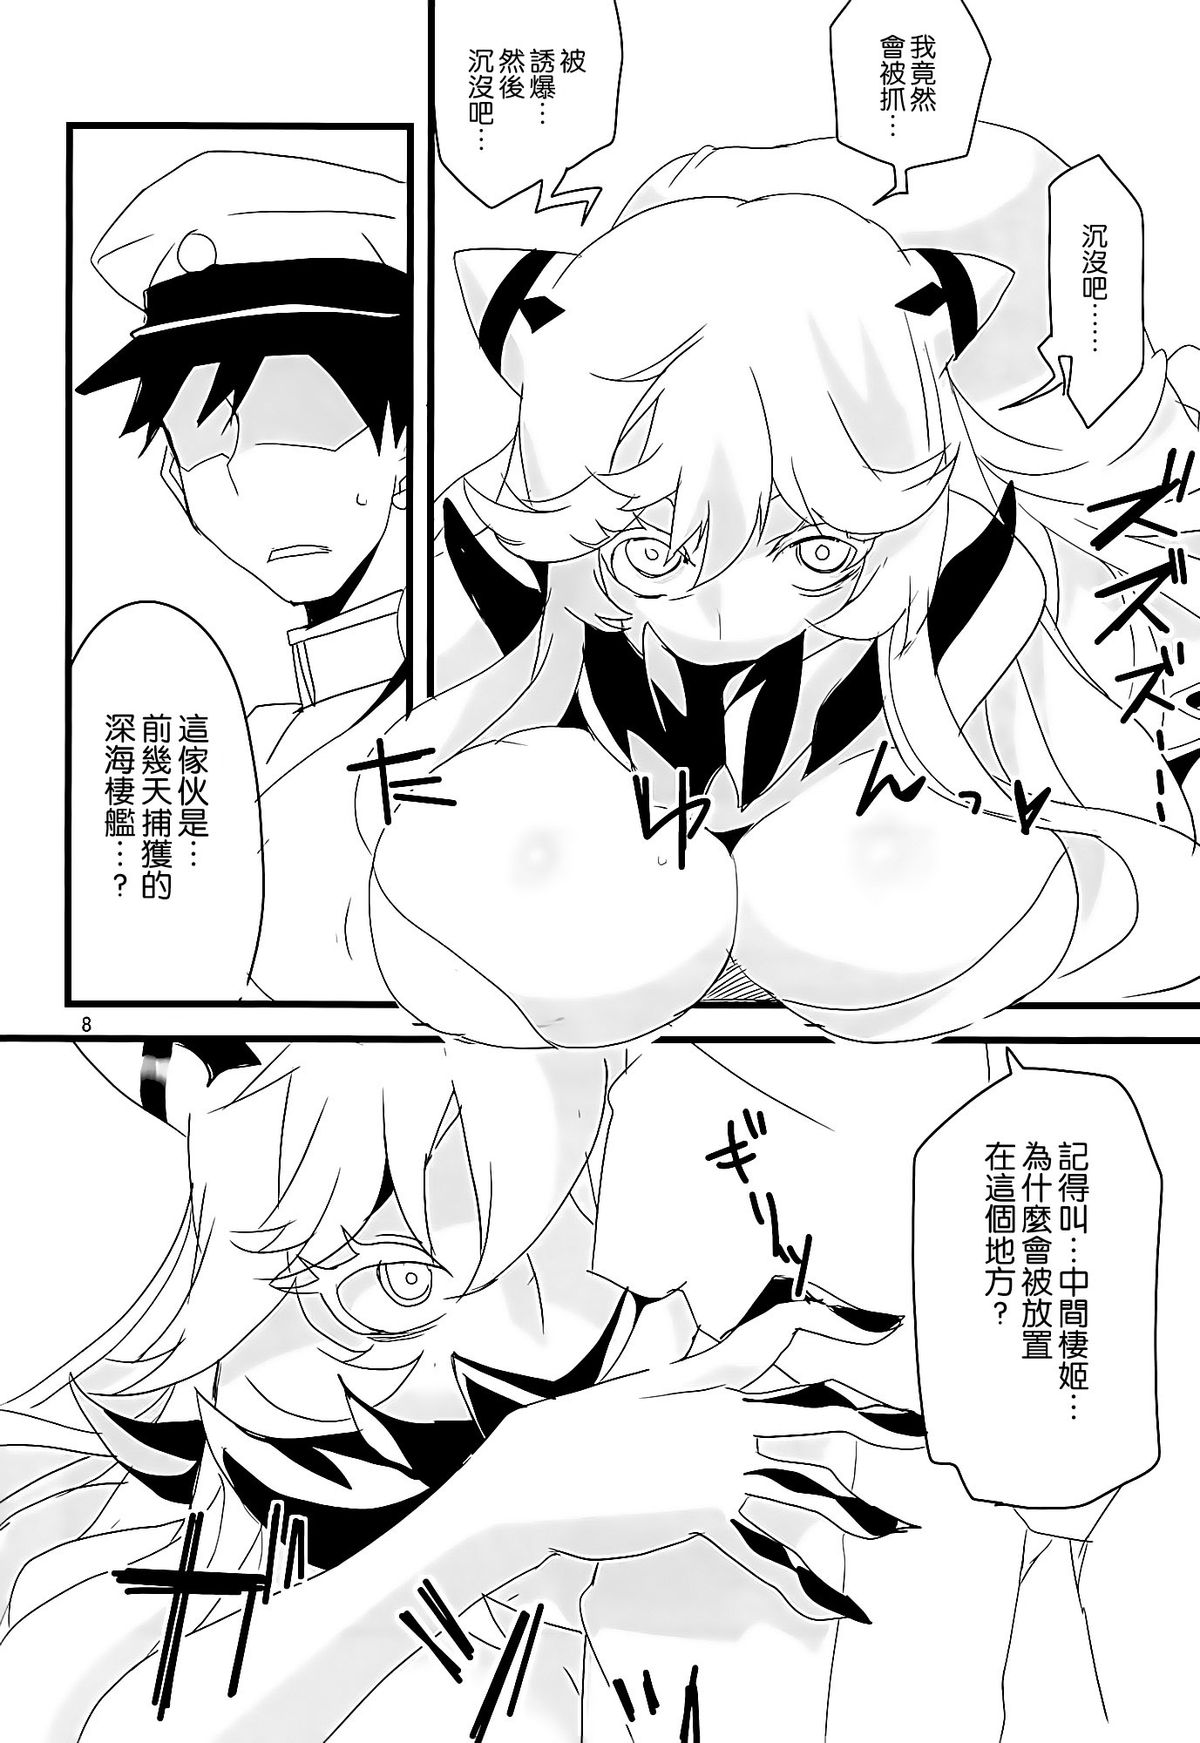 (C86) [BlueMage (Aoi Manabu)] Chu! (Kantai Collection -KanColle-) [Chinese] [空気系☆漢化] page 10 full